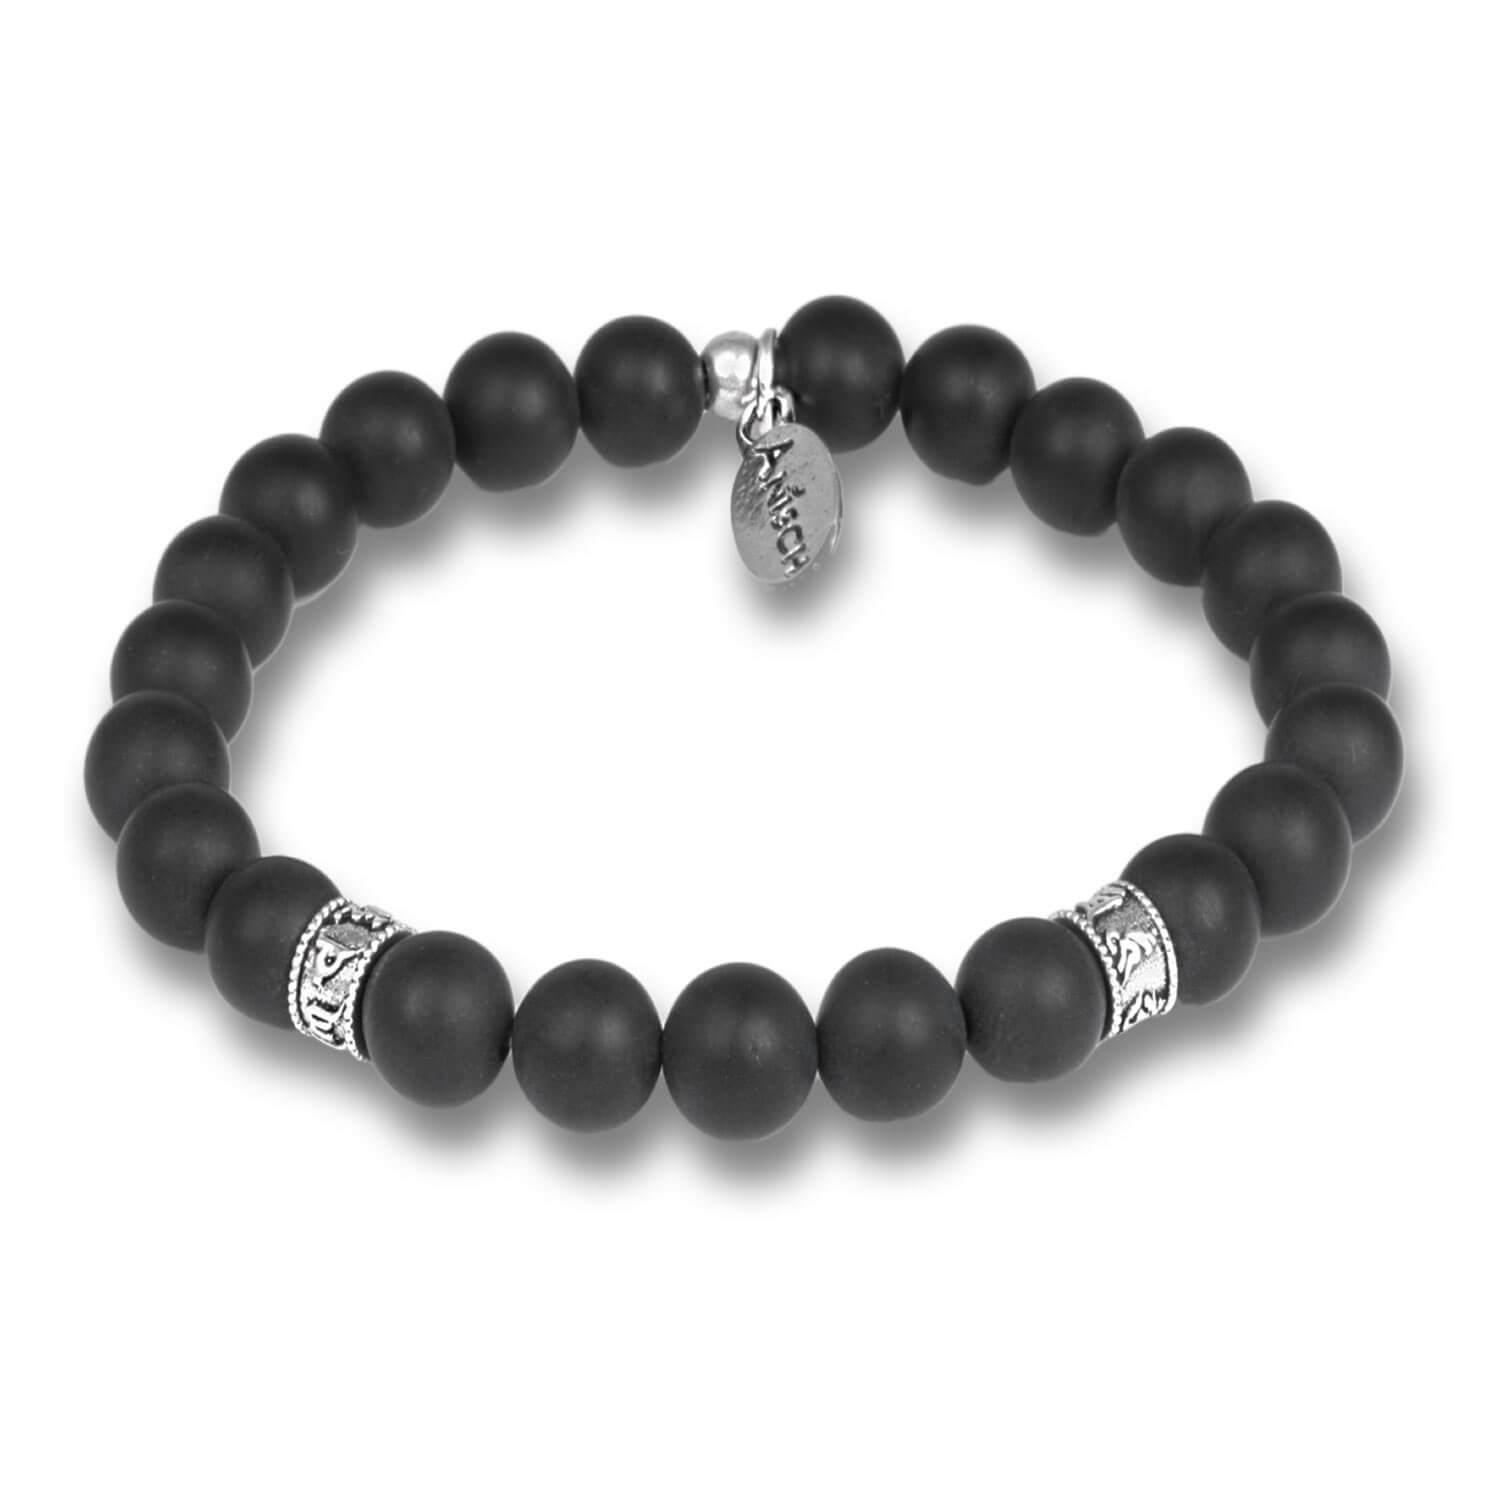 Onyx - Mantra Beads gemstone bracelet for men with sterling silver, 8 mm